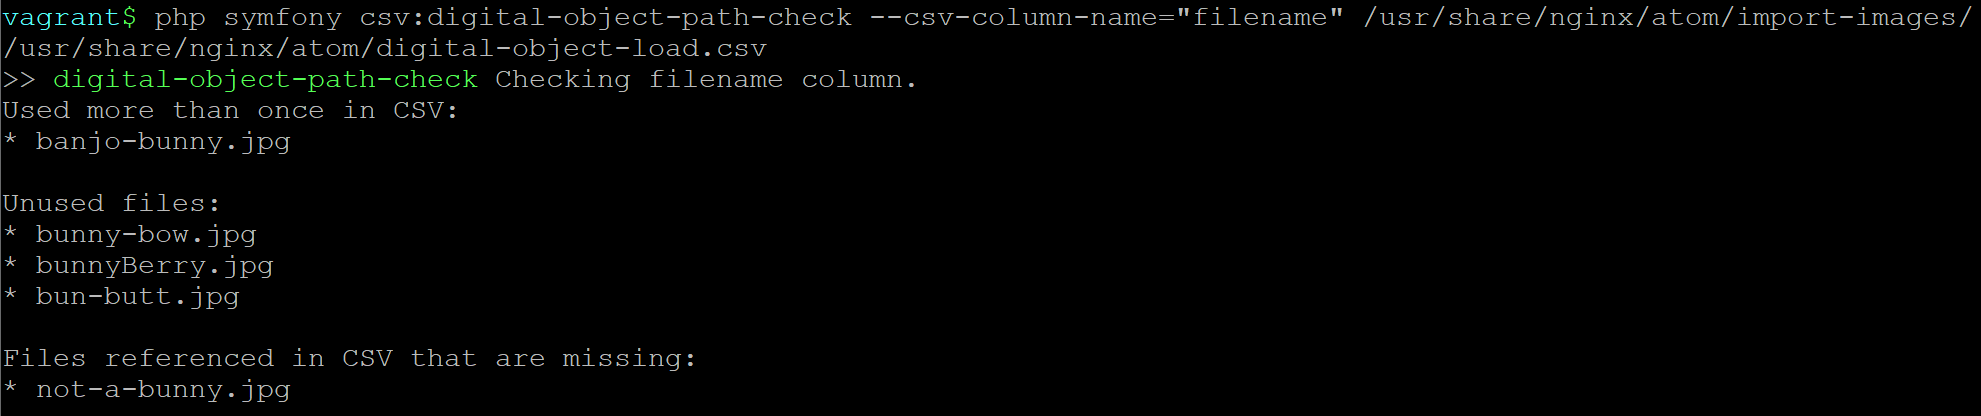 An image of the command-line output for the path-check task